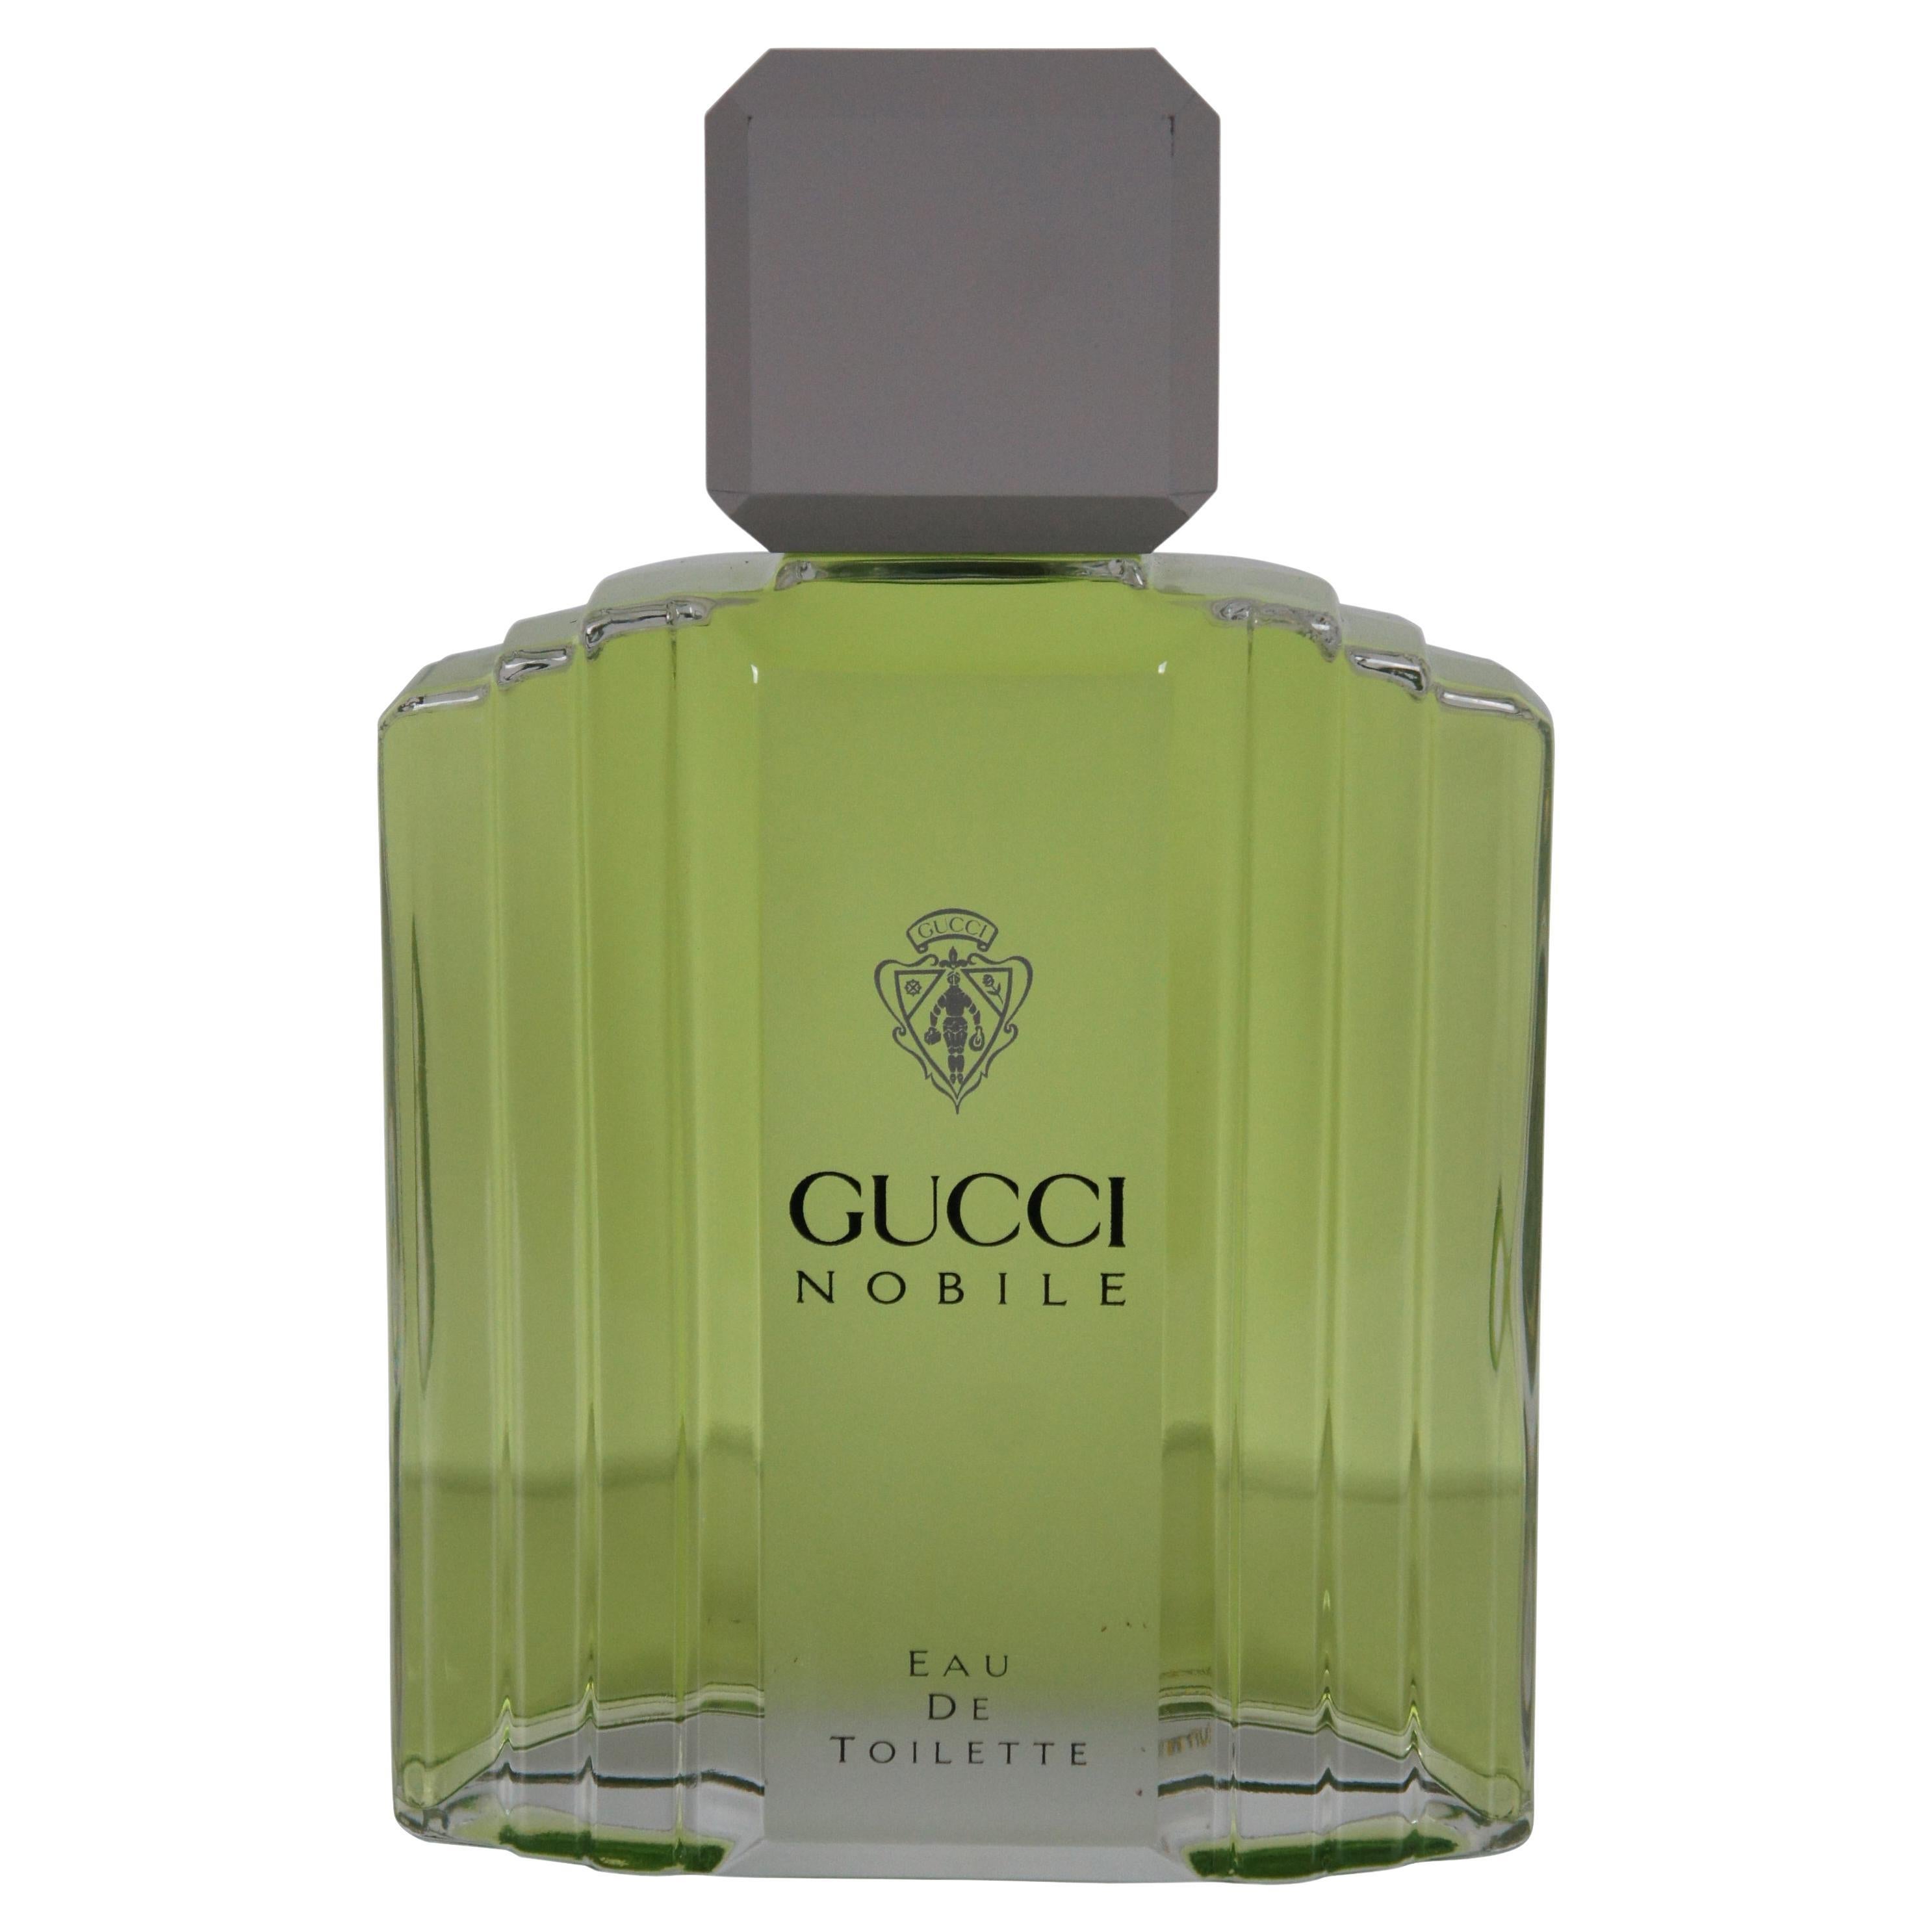 Gucci Nobile Toilette Factice Dummy Cologne Perfume Bottle Display For Sale at 1stDibs